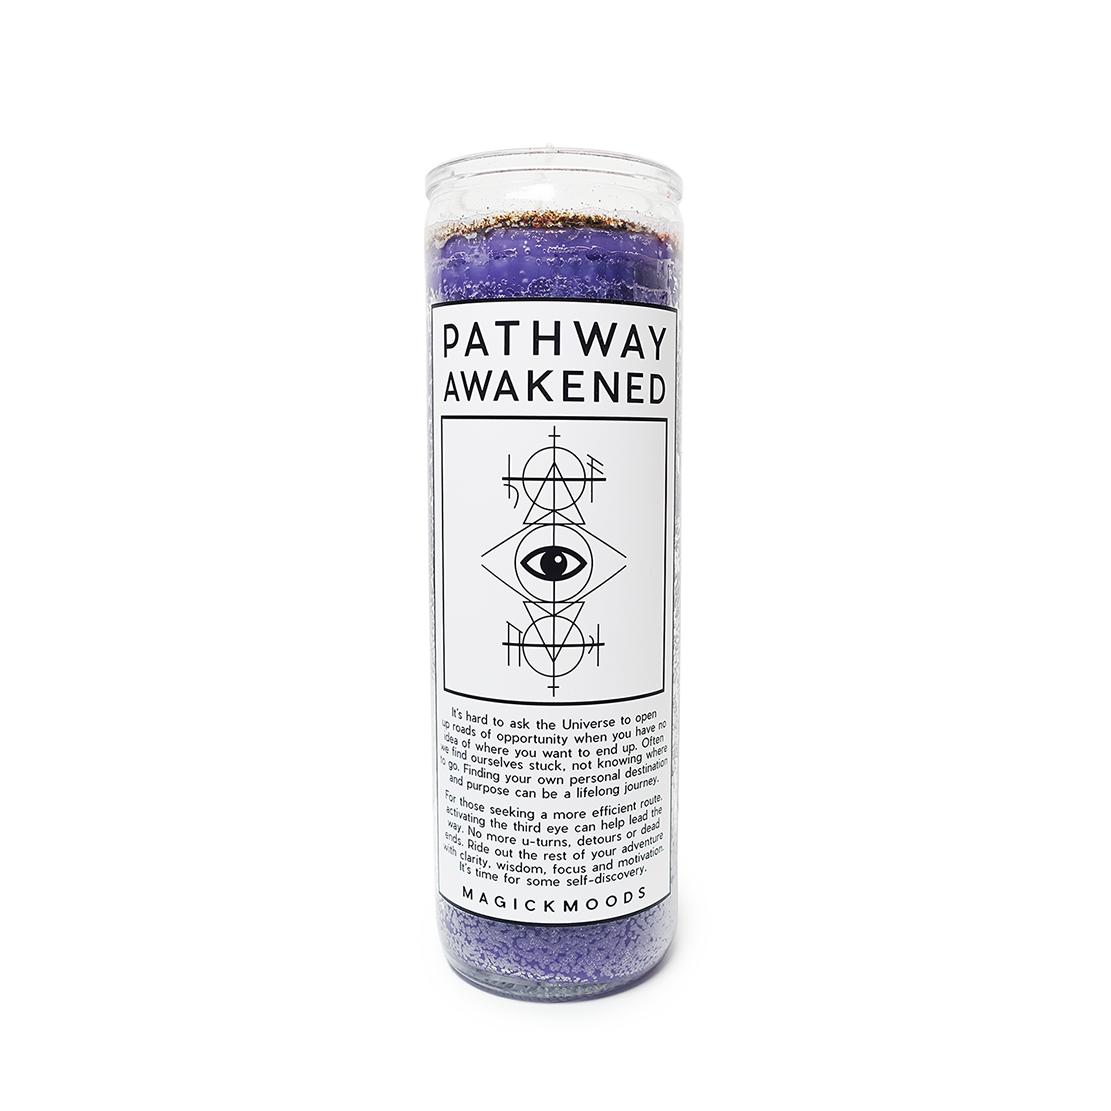 Pathway Awakened 7-Day Meditation Candle - PREORDER - Ships by July 28th, 2023